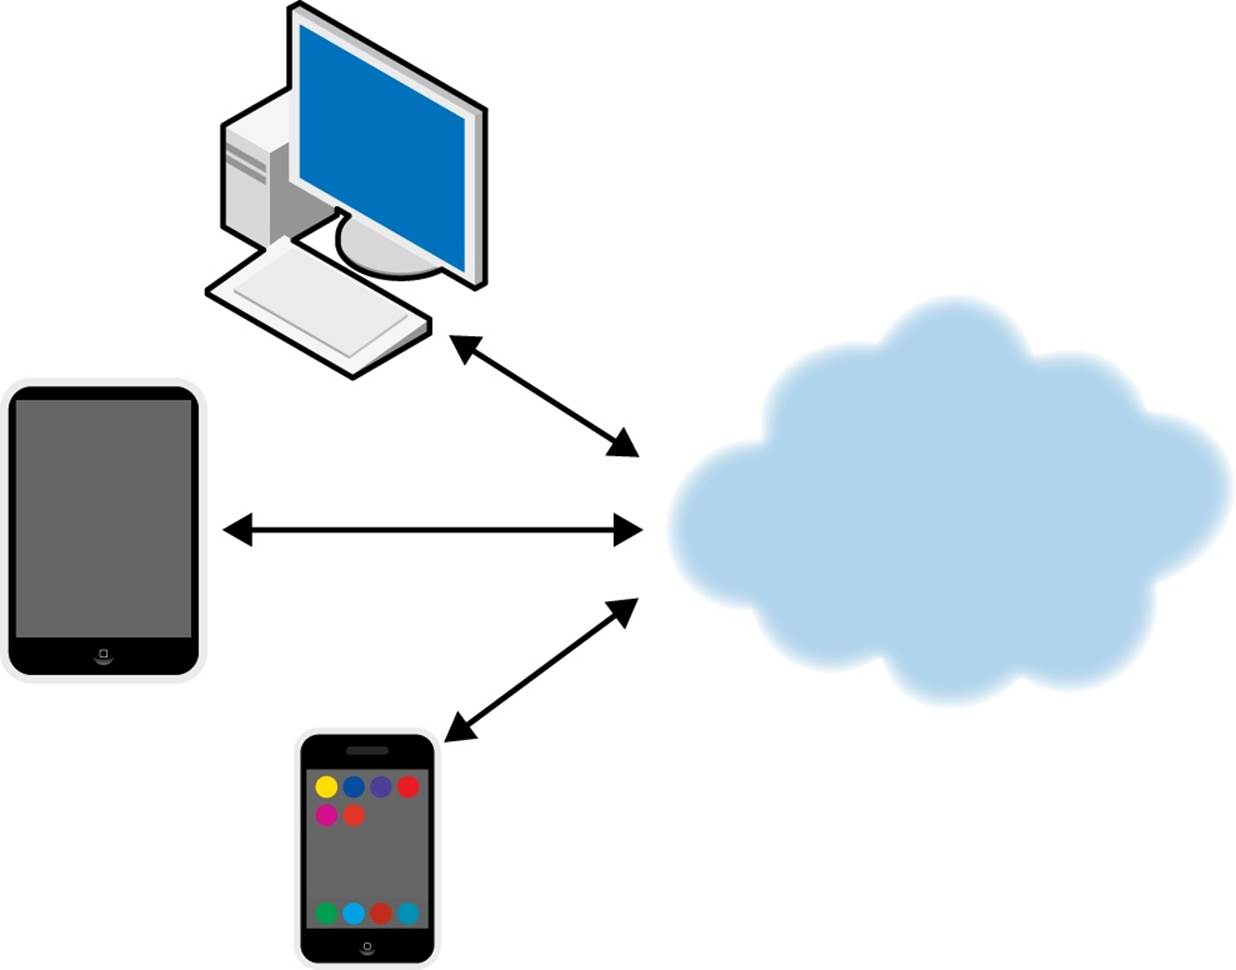 Multiple devices and cloud deployments